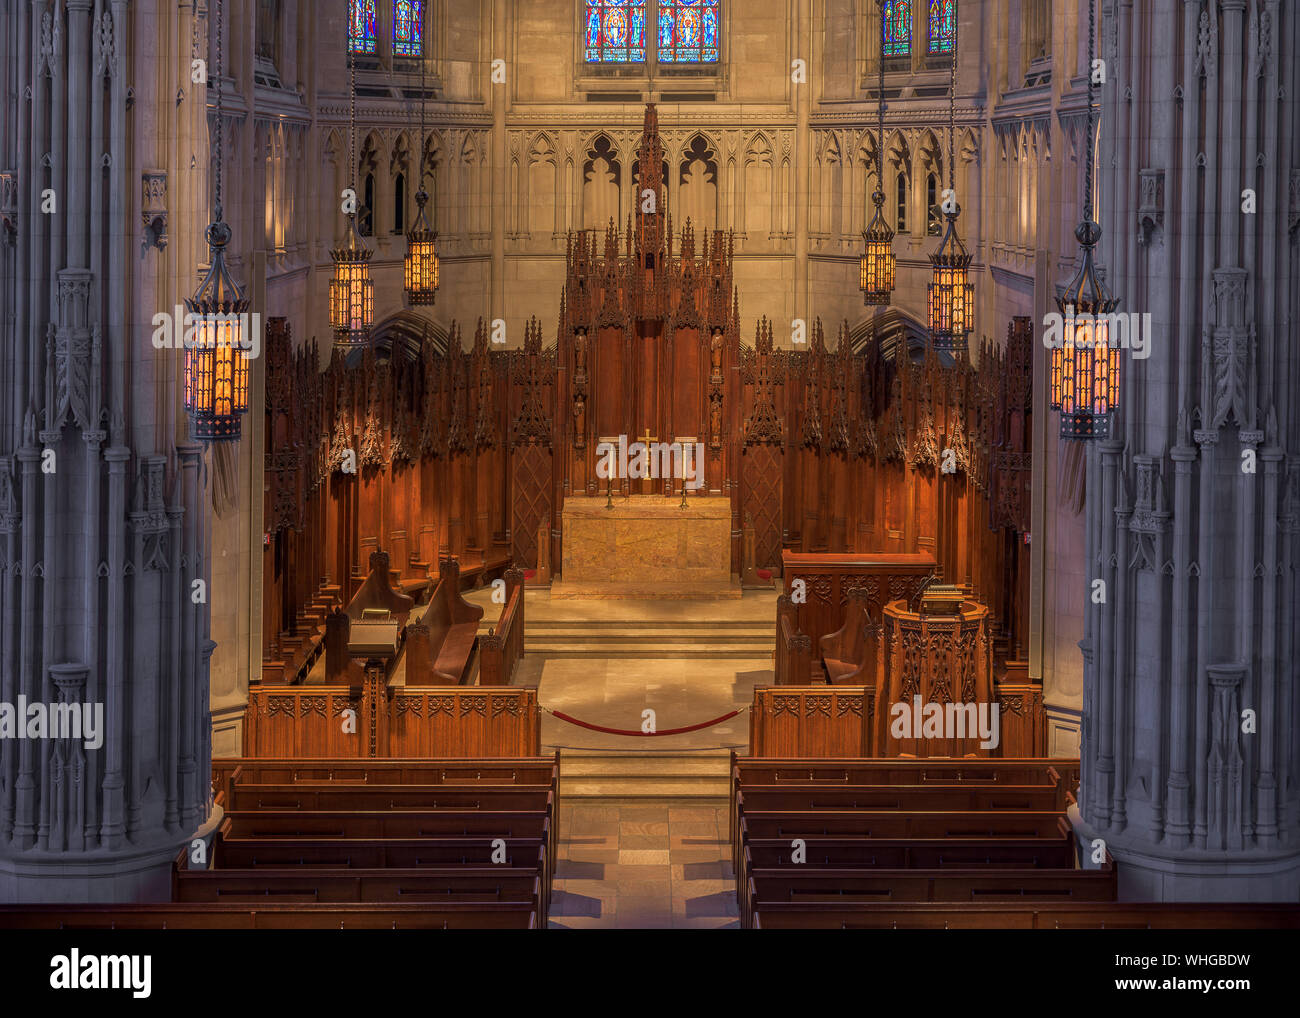 Interior of the historic Heinz Memorial Chapel on the campus of the University of Pittsburgh in Pittsburgh, Pennsylvania Stock Photo